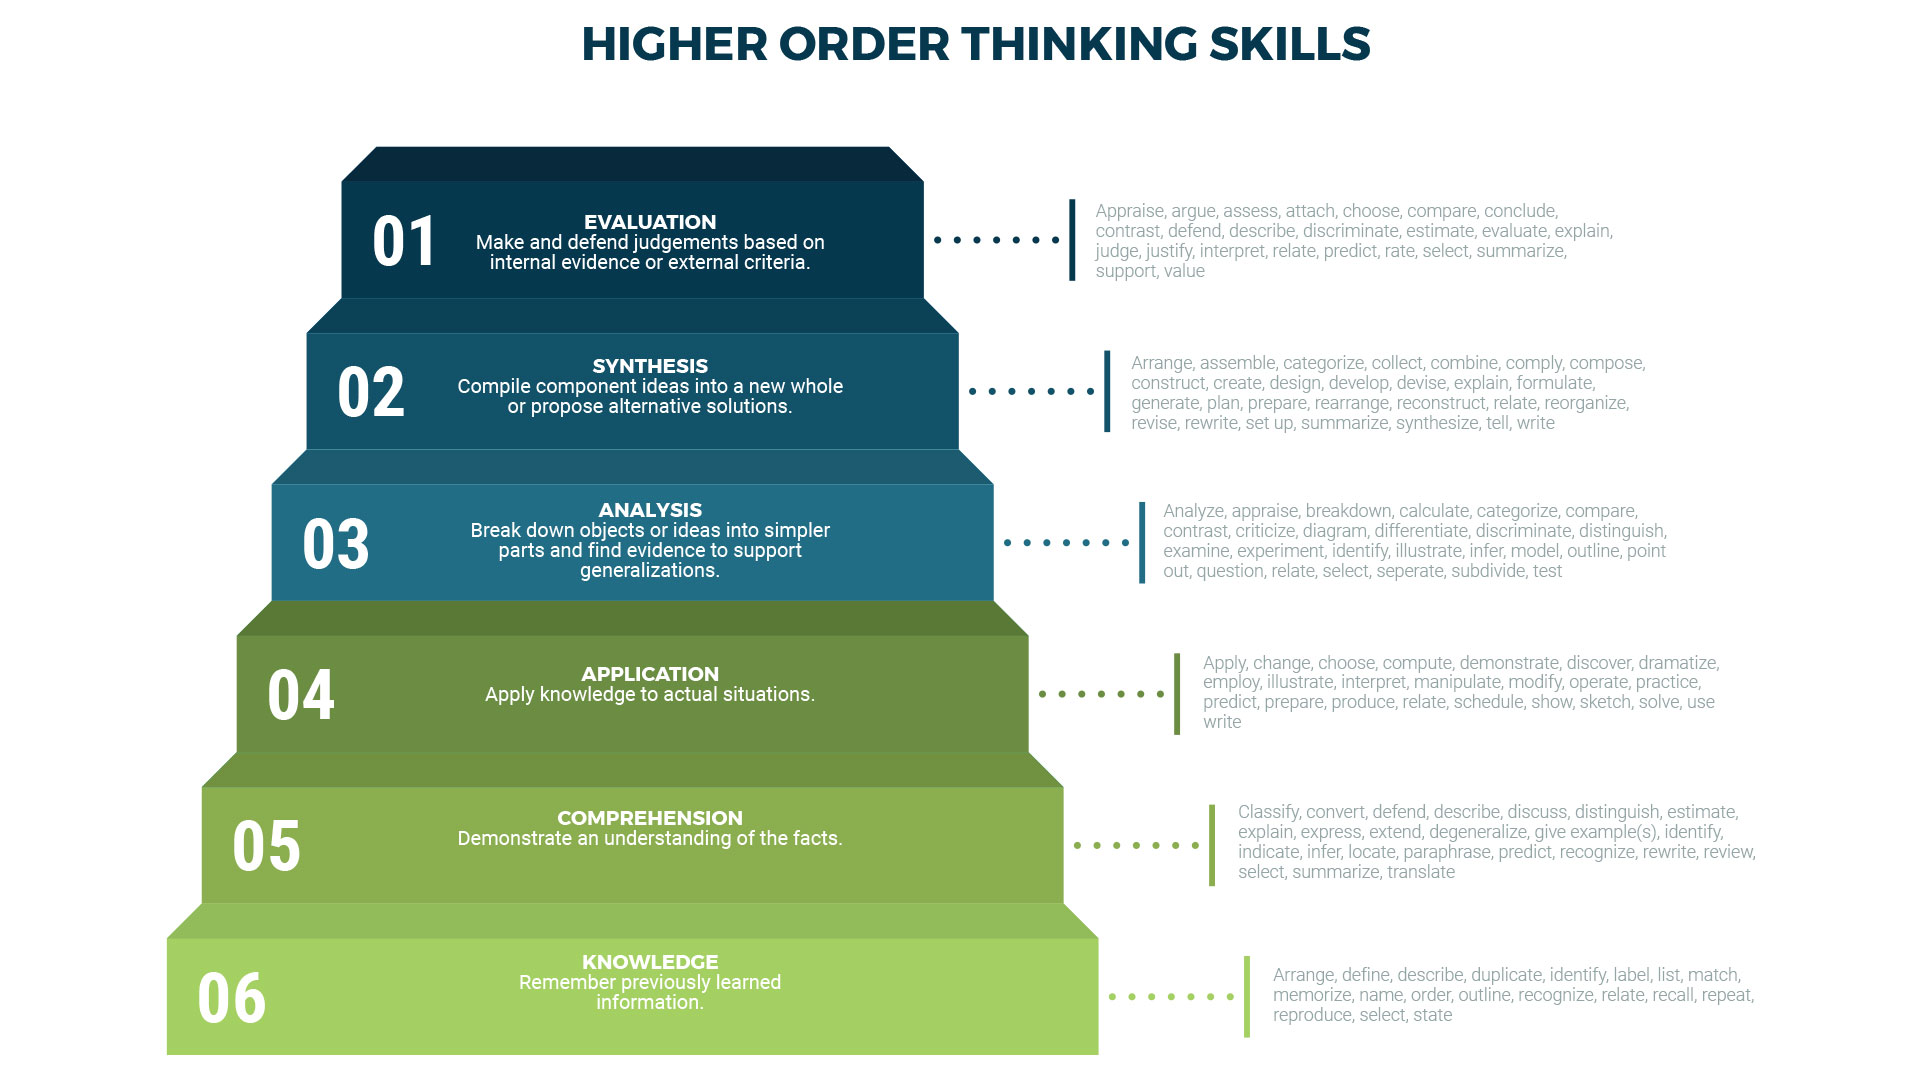 Using Bloom's Taxonomy to create higher order questions in eLearning